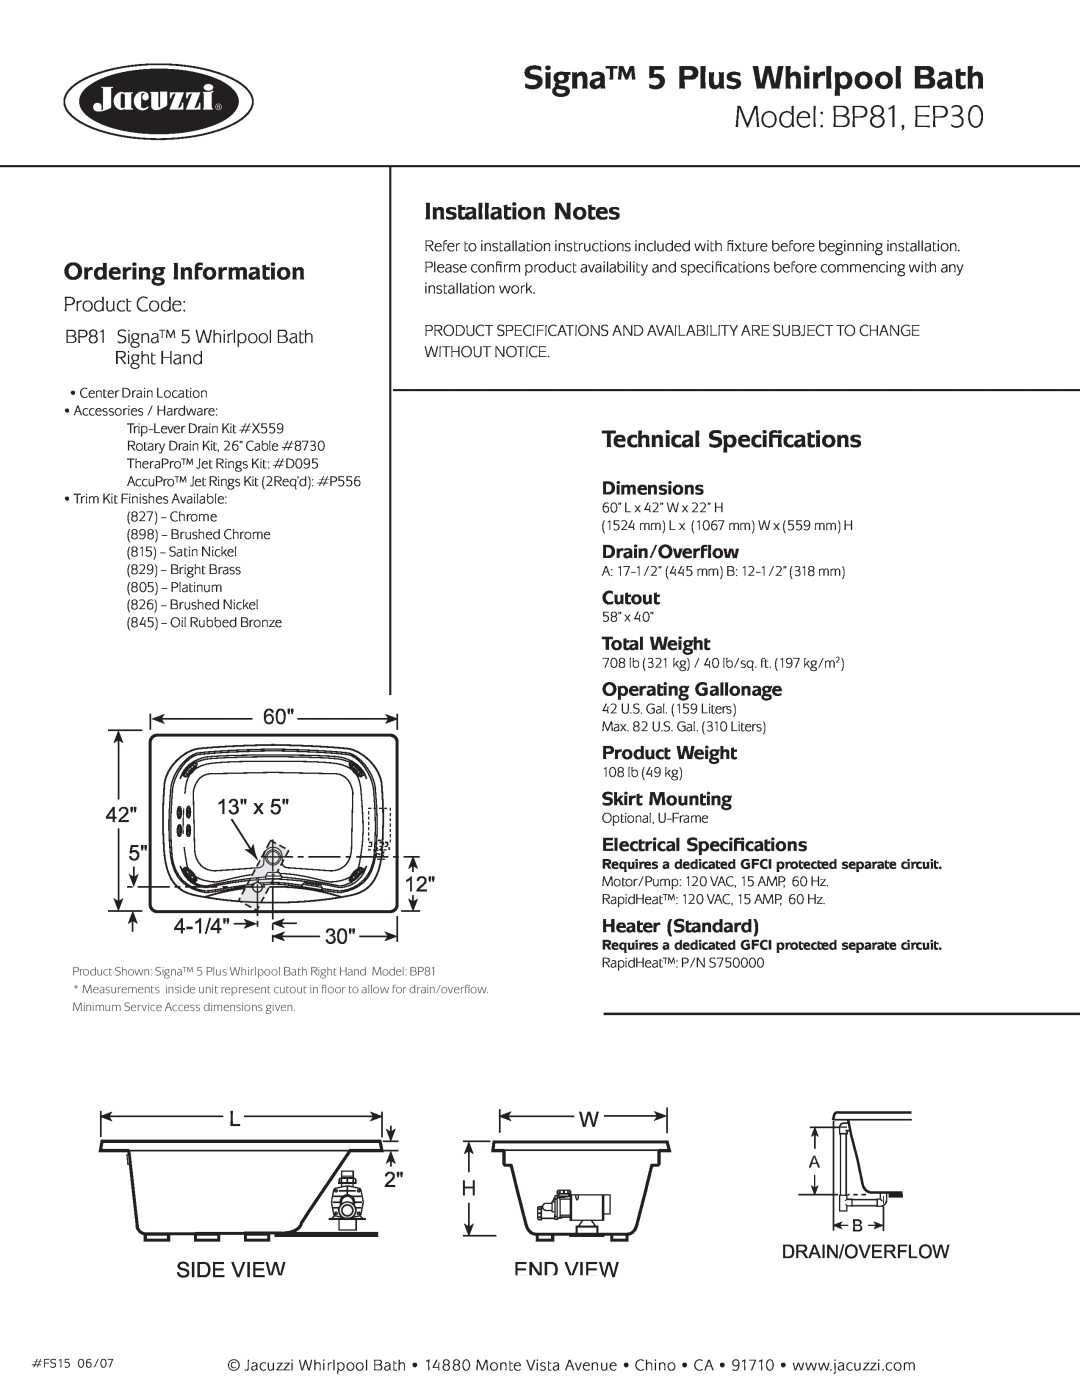 Jacuzzi Signa 5 Plus Whirlpool Bath, Model BP81, EP30, Ordering Information, Installation Notes, Product Code, 4-1/4 